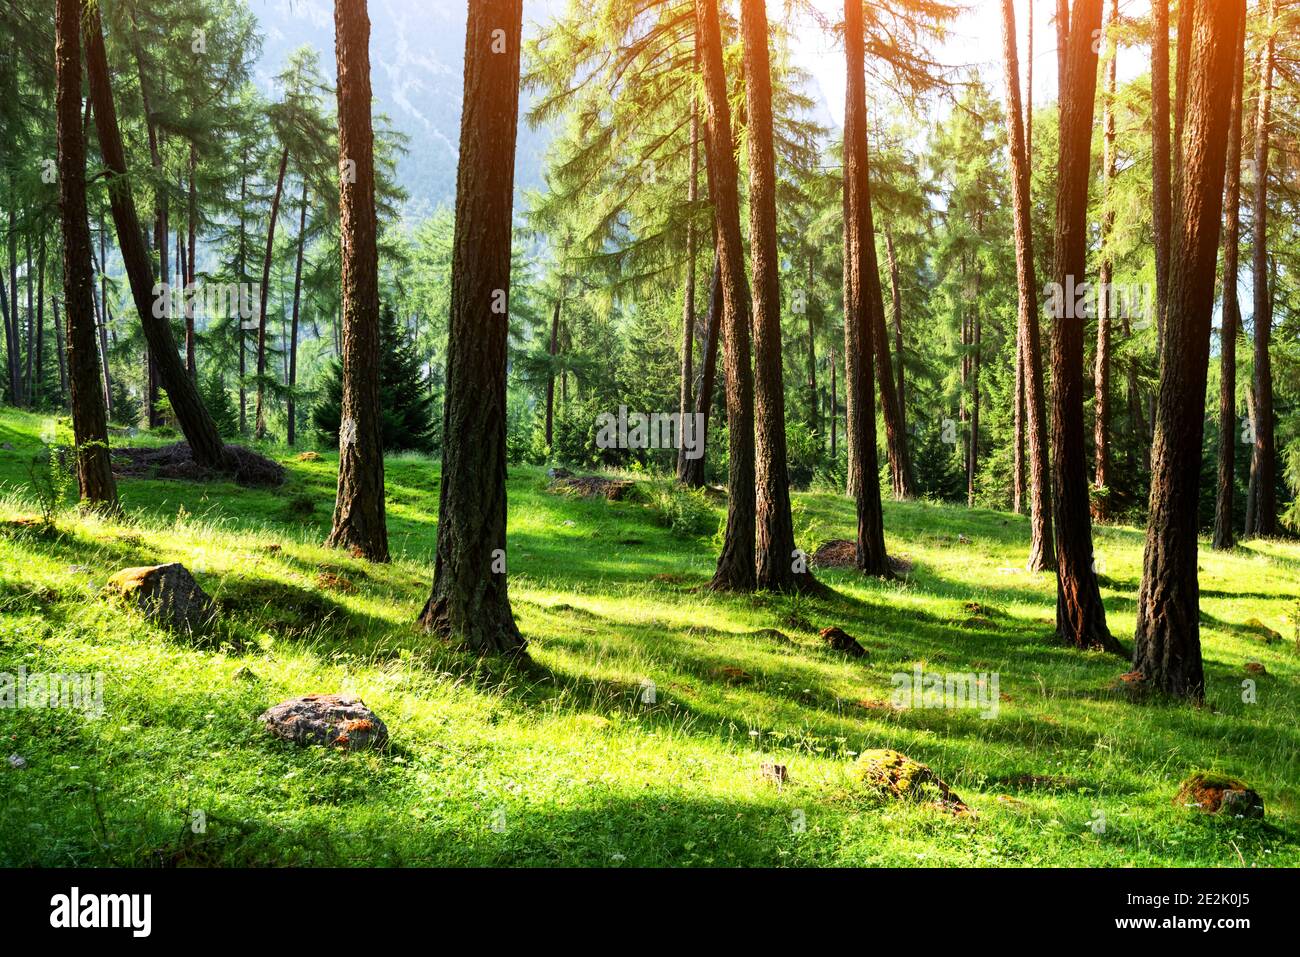 Beautiful summer evergreen forest with pine trees and lush grass. Nature background, landscape photography Stock Photo